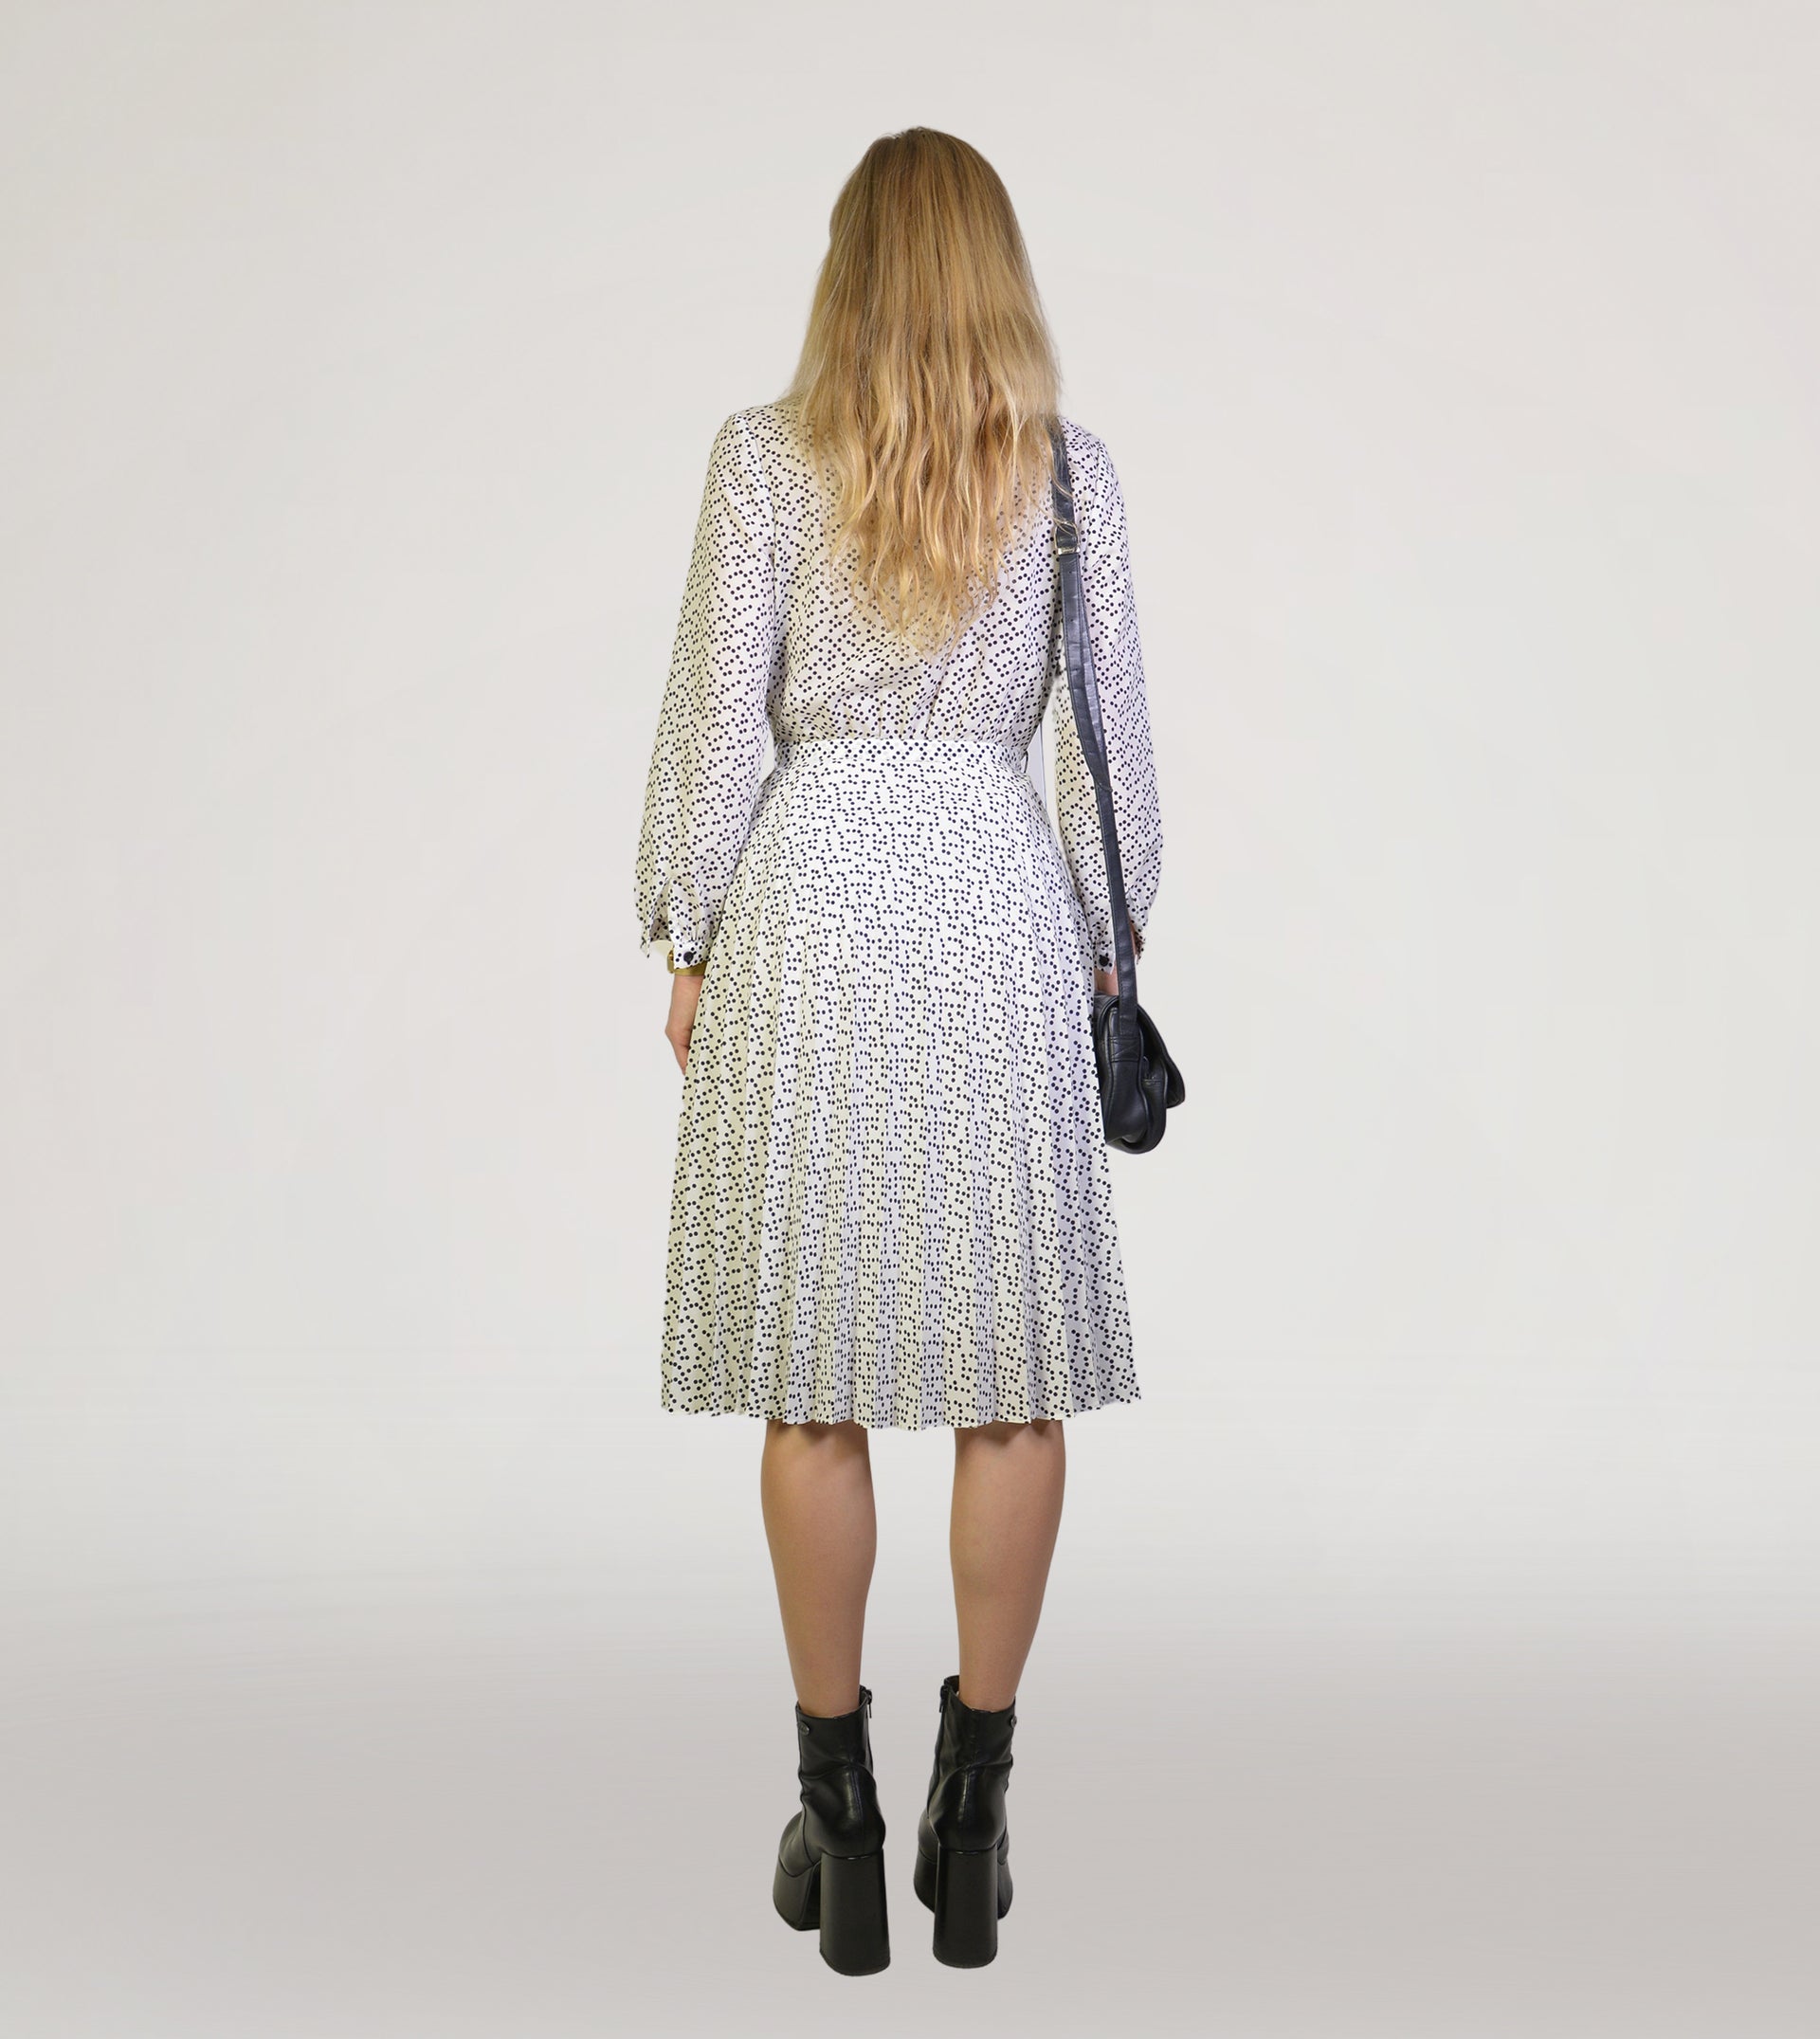 Dotted dress - PICKNWEIGHT - VINTAGE KILO STORE